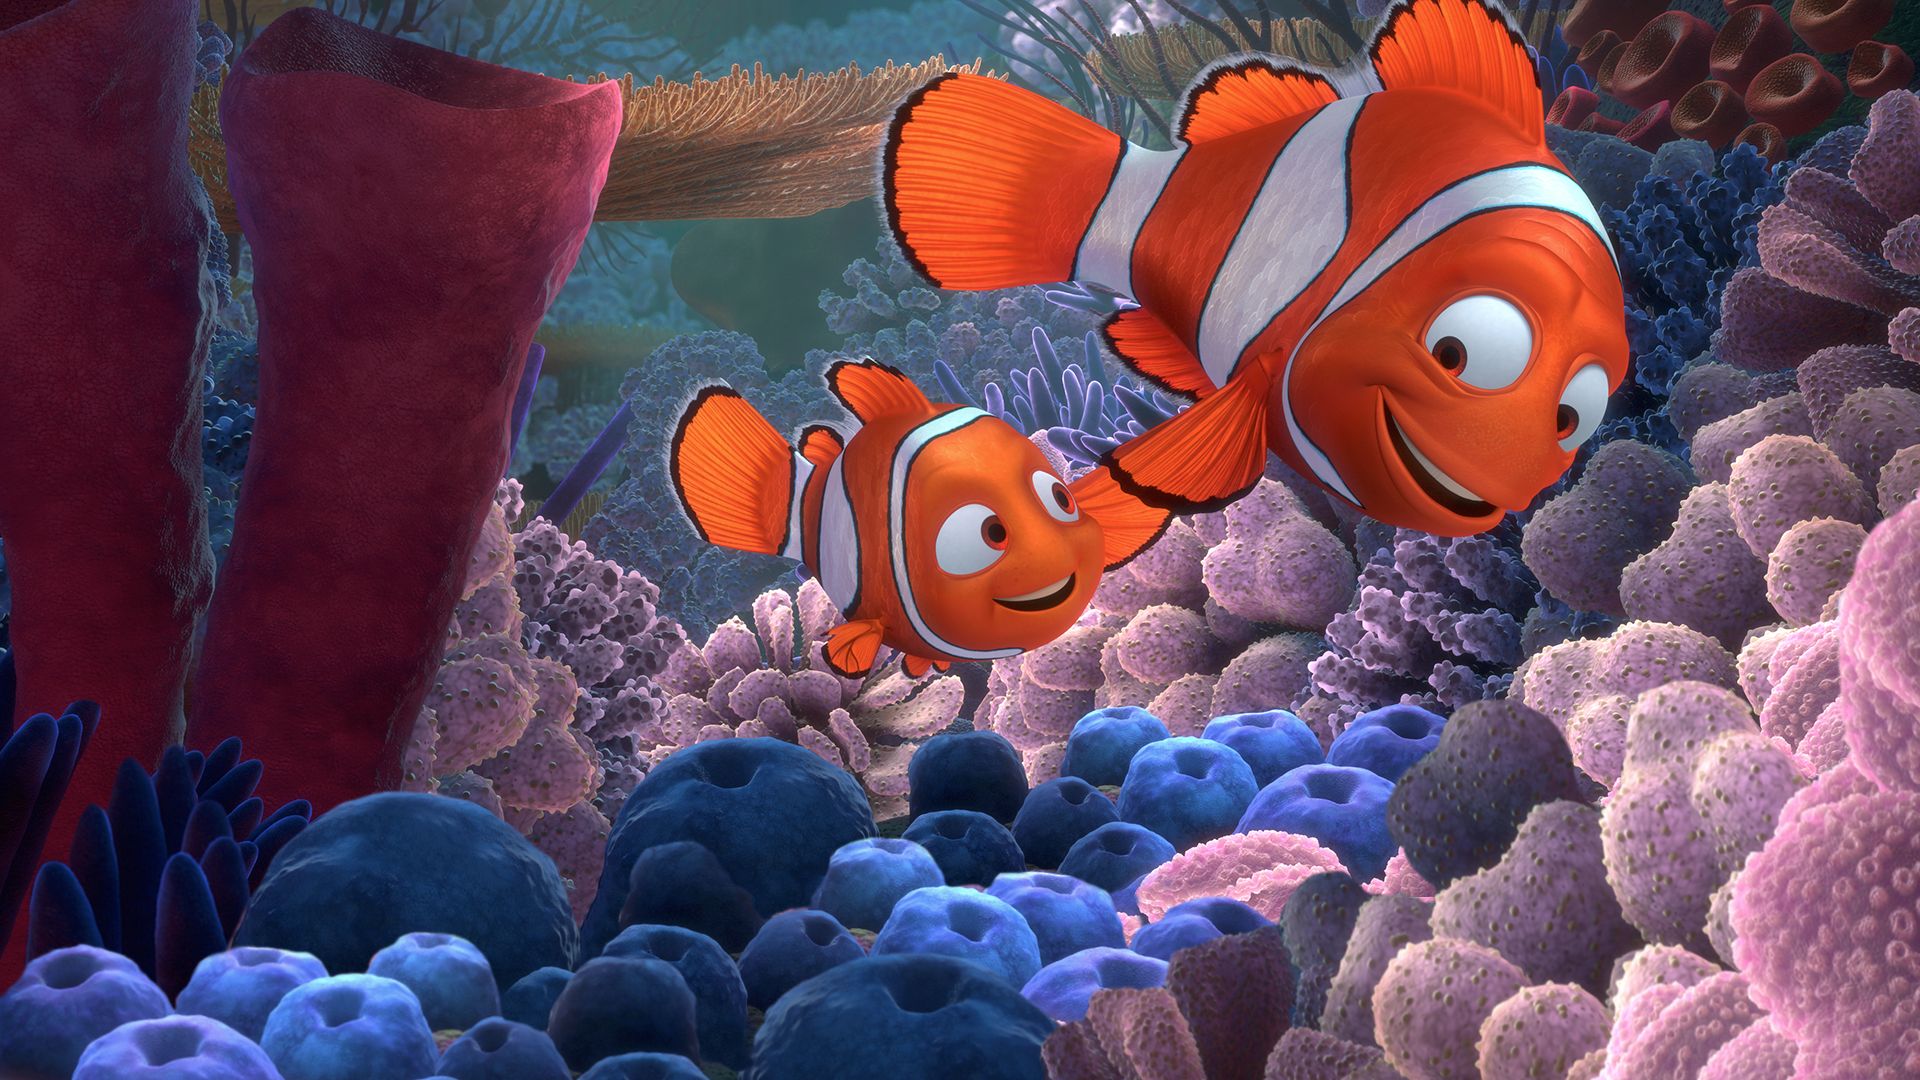 movies ruined with sex scenes - Finding Nemo